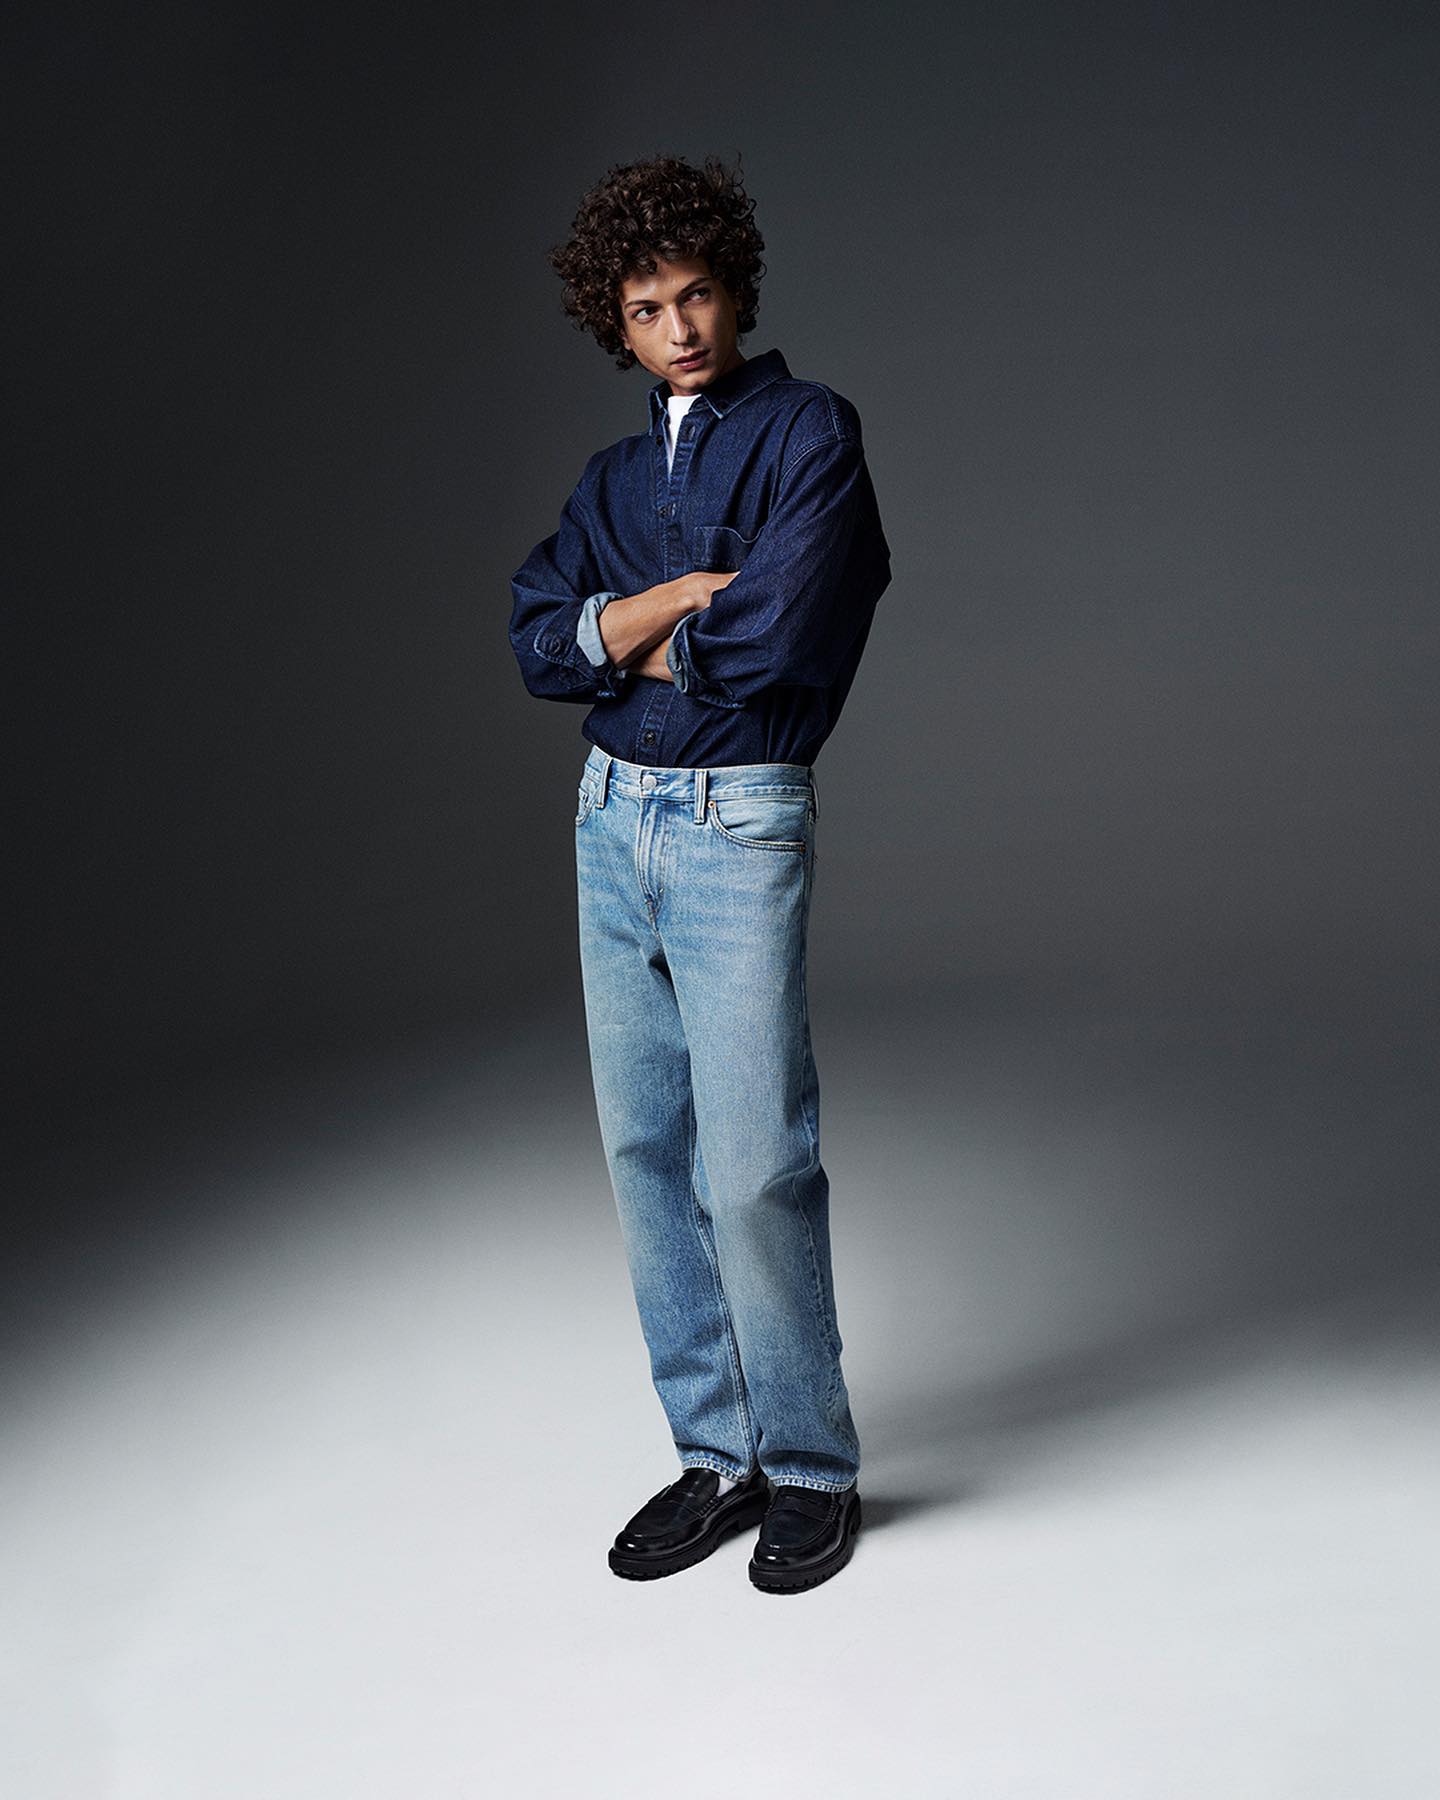 H&M man model wears the Relaxed jeans in blue denim